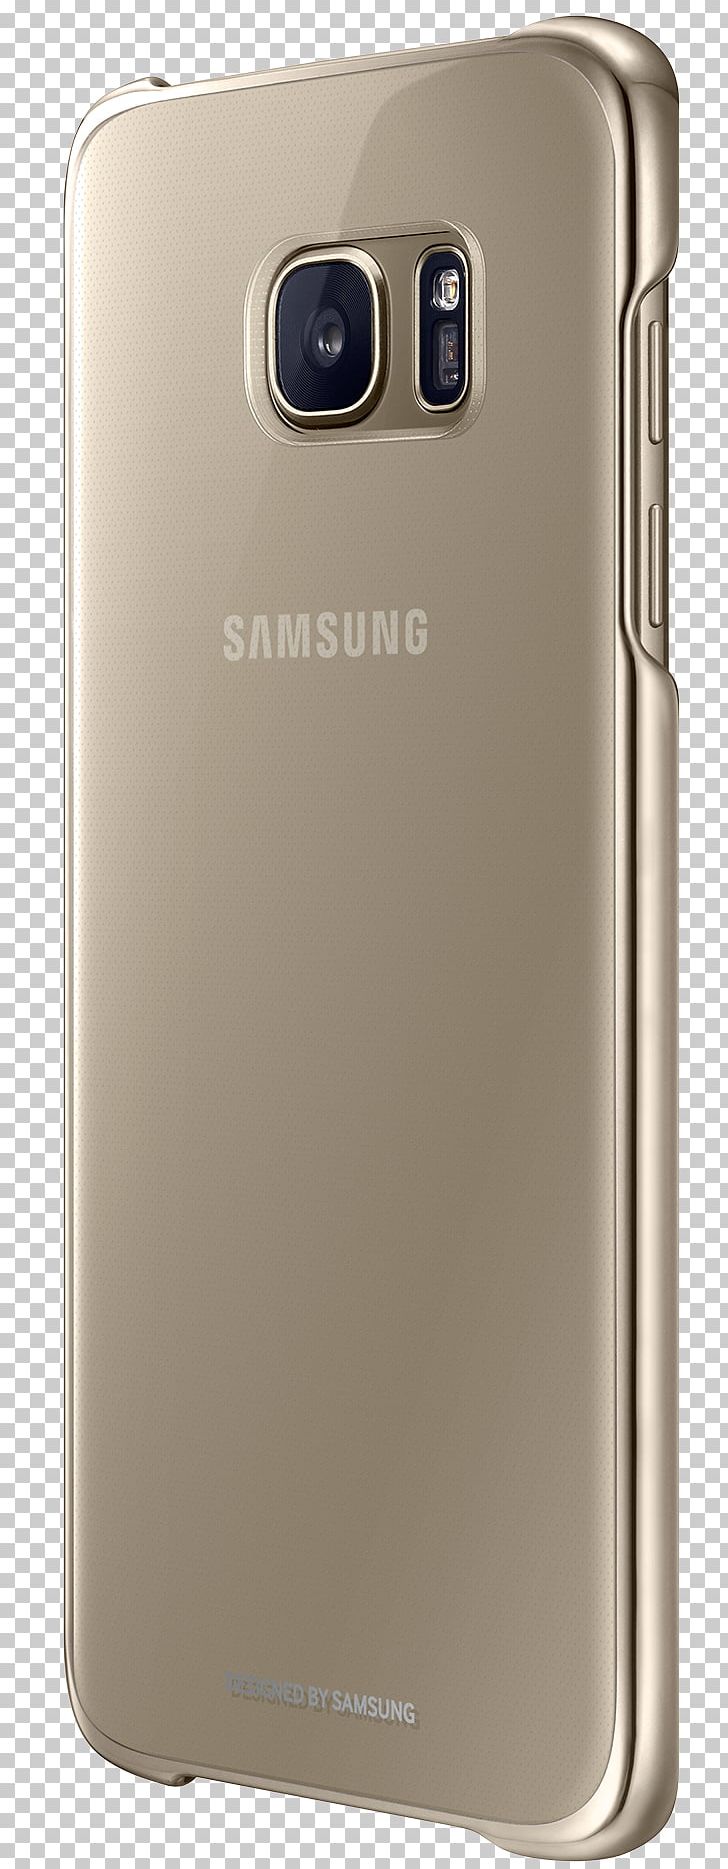 Samsung GALAXY S7 Edge Smartphone Feature Phone Samsung Galaxy Note 4 PNG, Clipart, 7 Edge, Electronic Device, Electronics, Gadget, Mobile Phone Free PNG Download